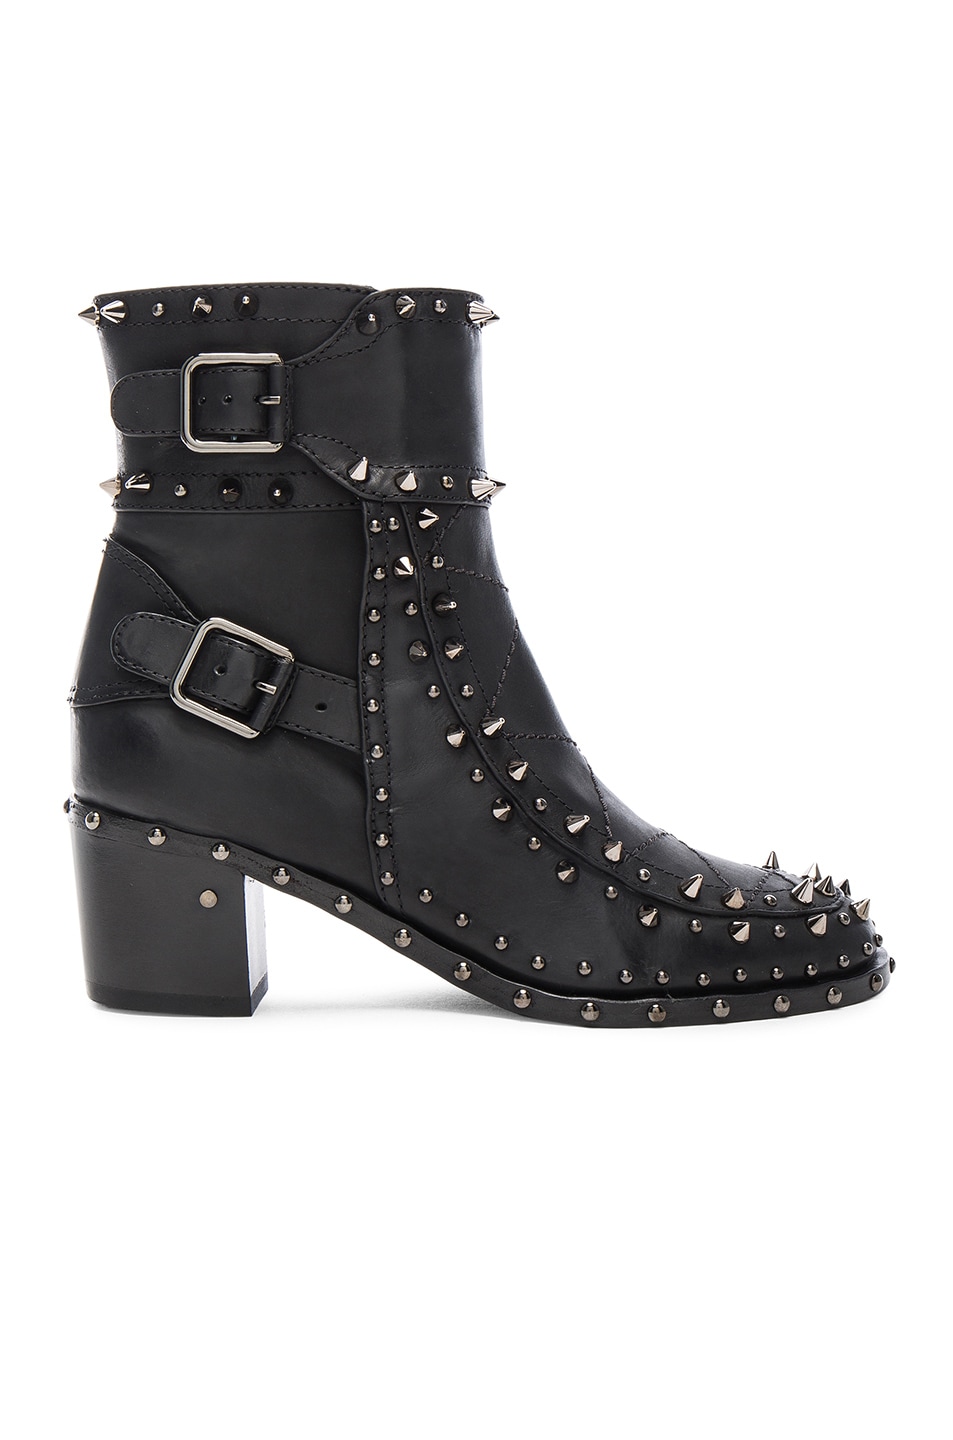 Image 1 of Laurence Dacade Badely Leather Boots in Black & Rutenium